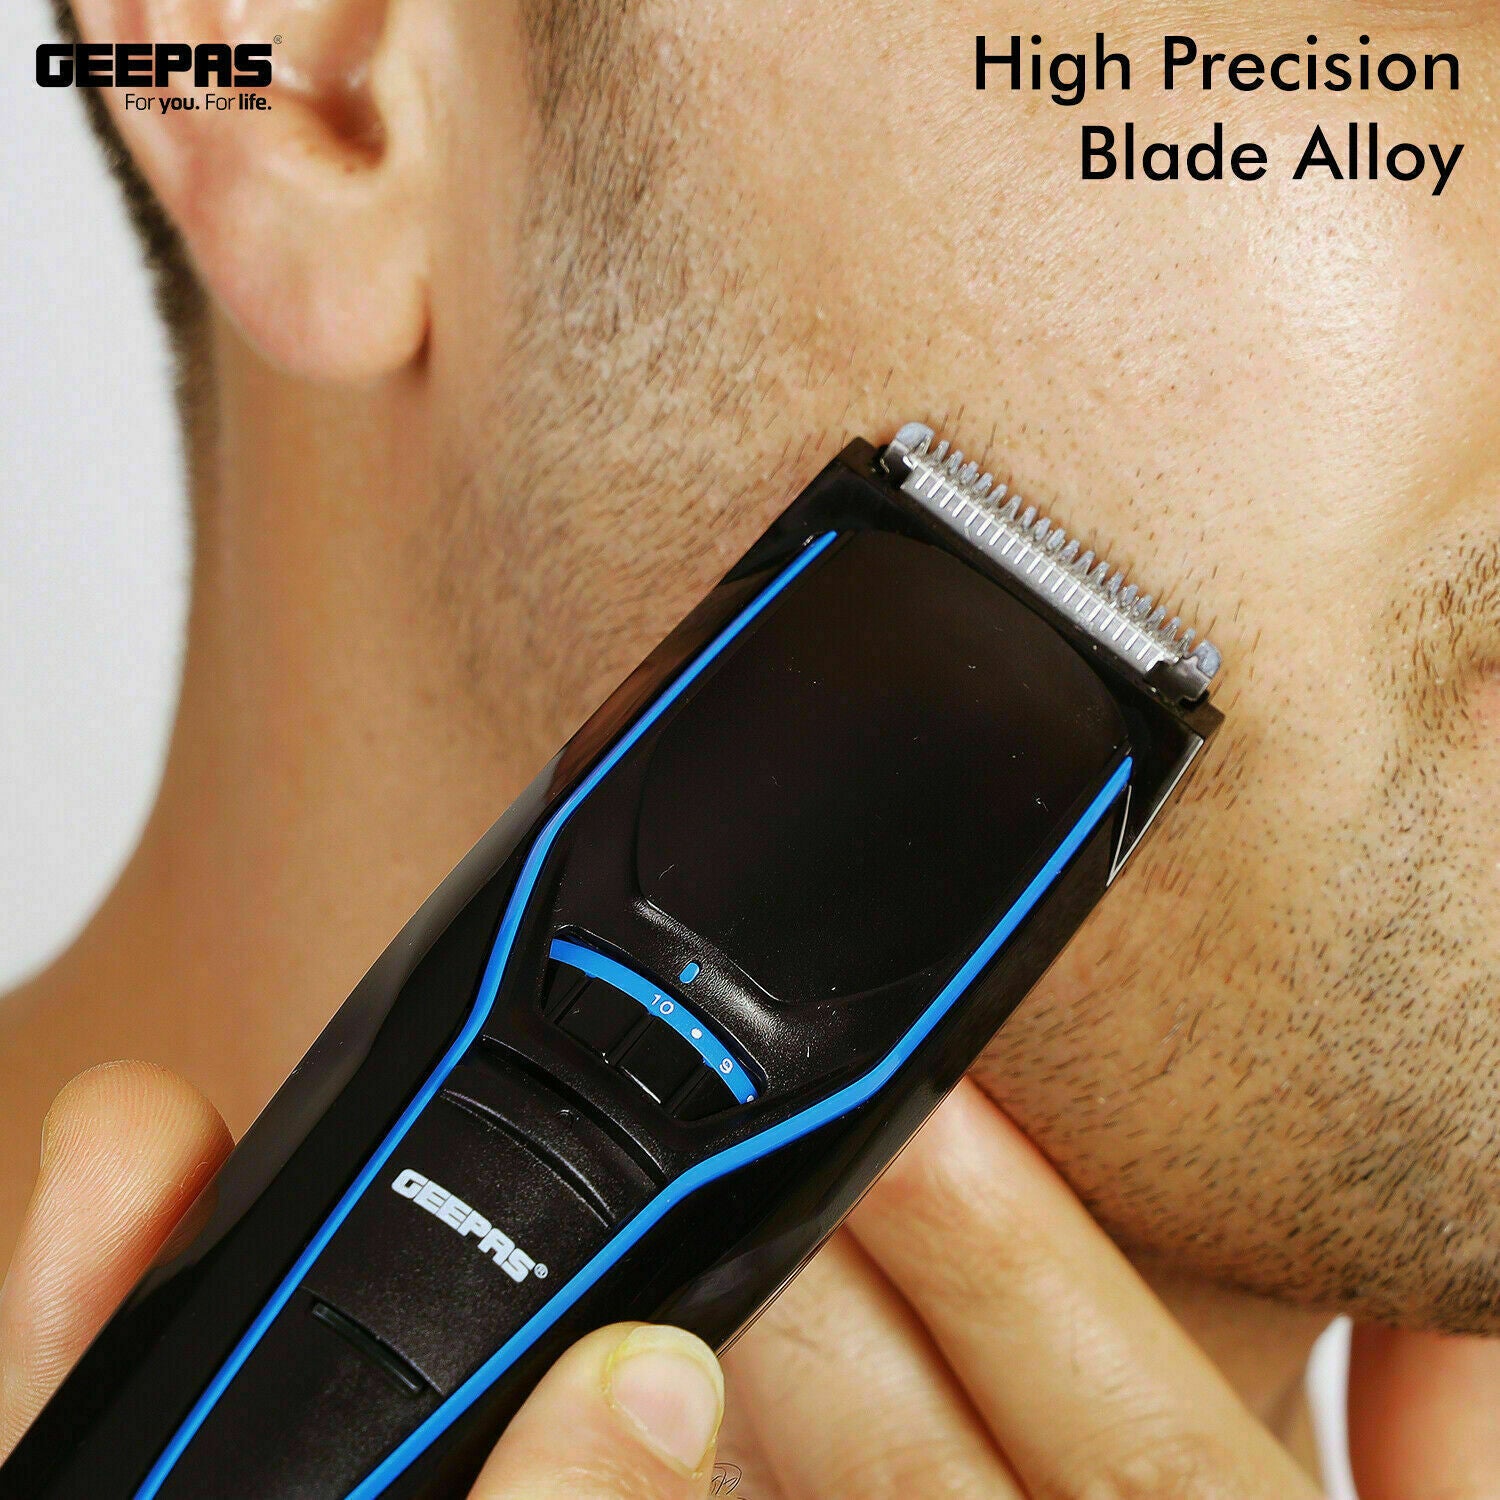 Geepas Rechargeable Beard Trimmer in Bahrain - Halabh